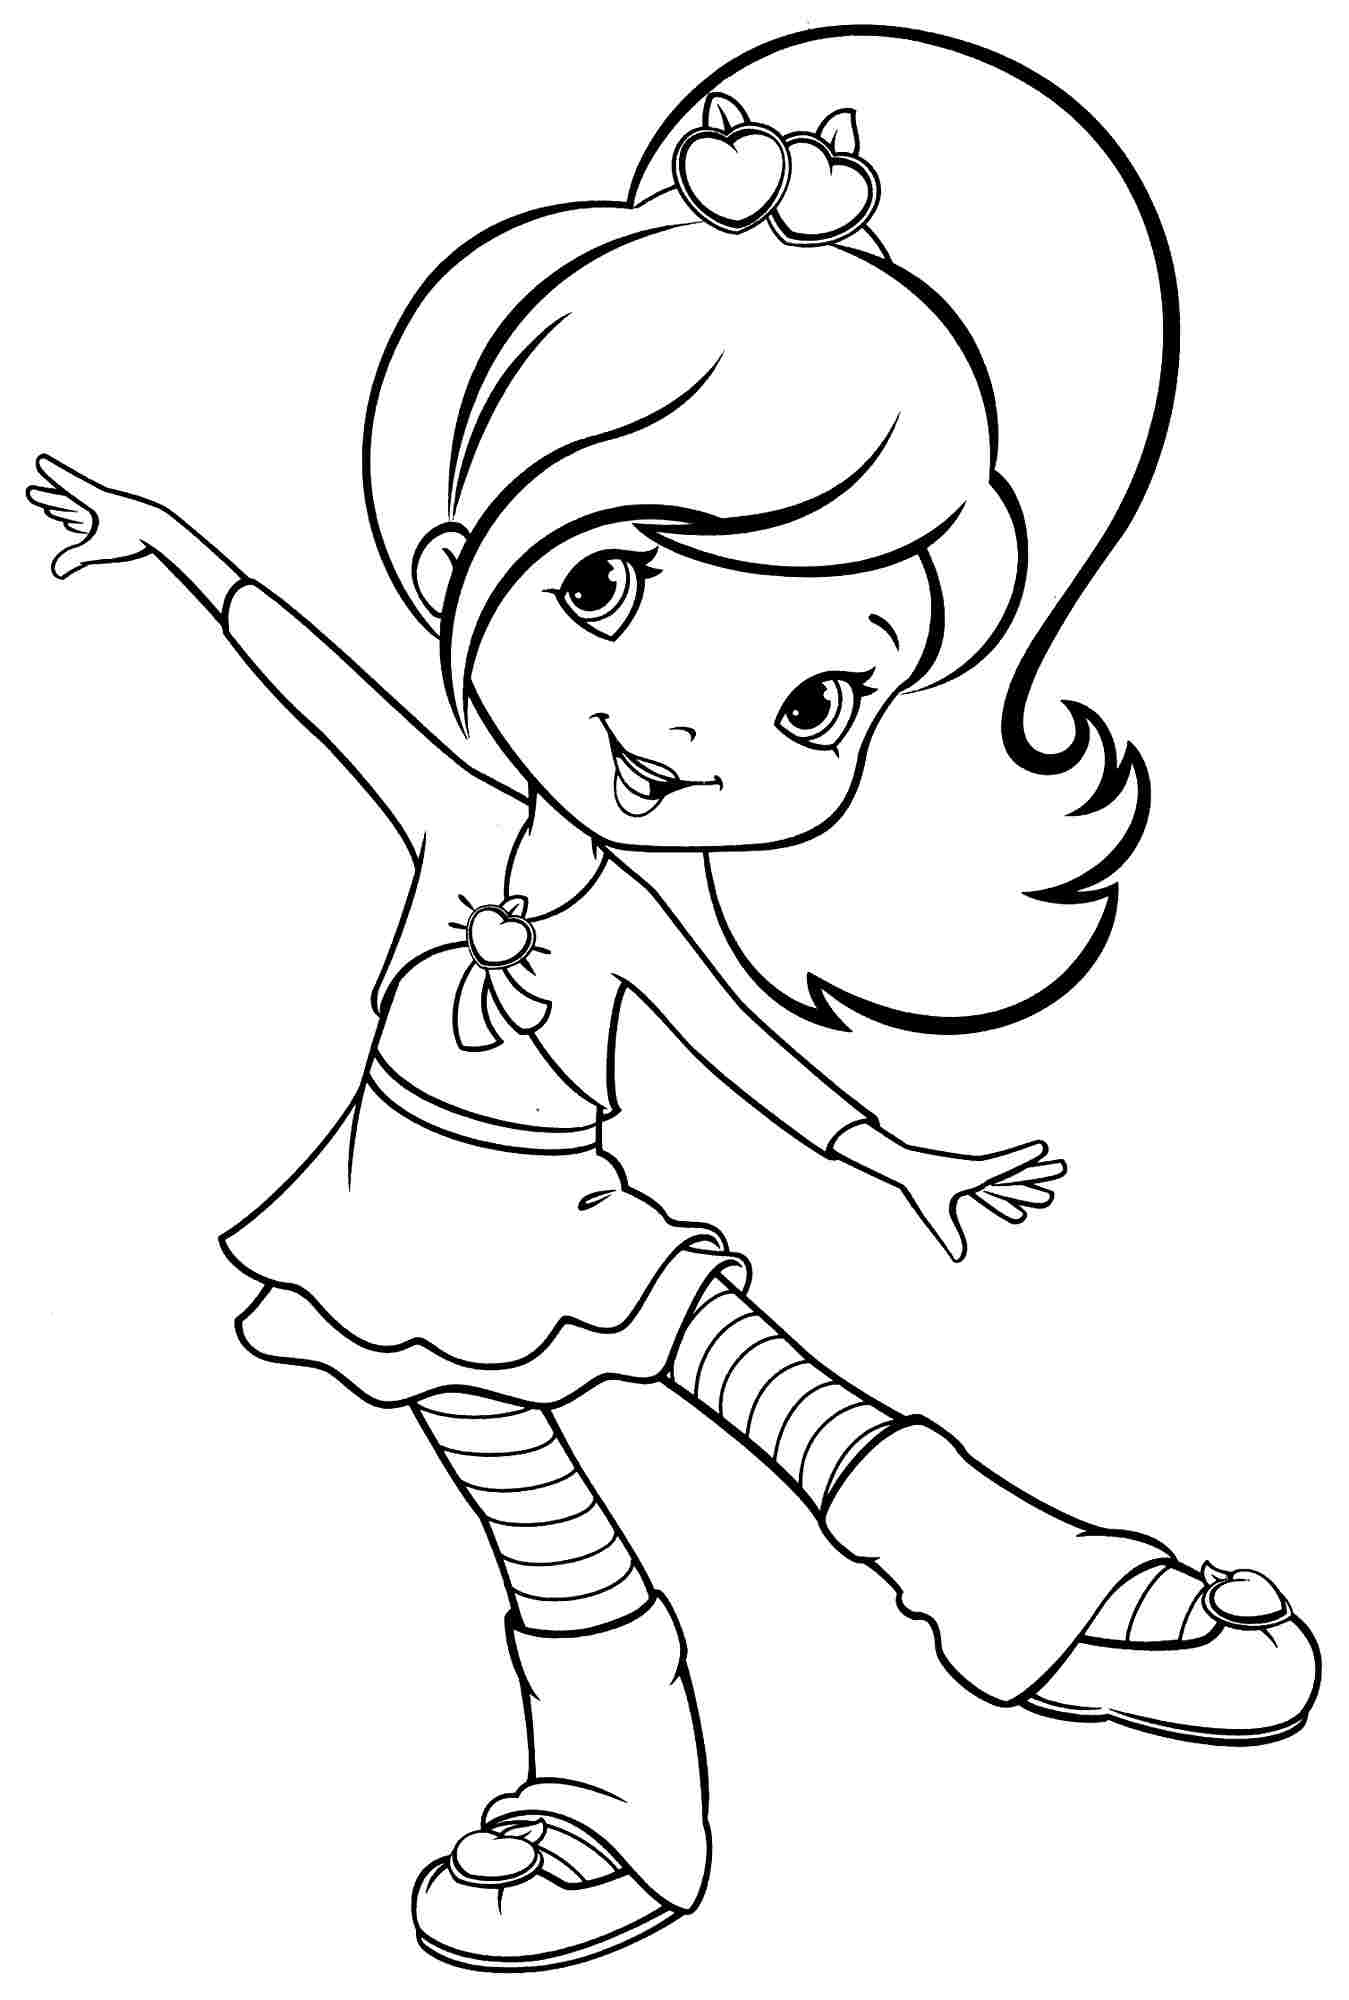 Coloring Pages For Girls - 70 фото